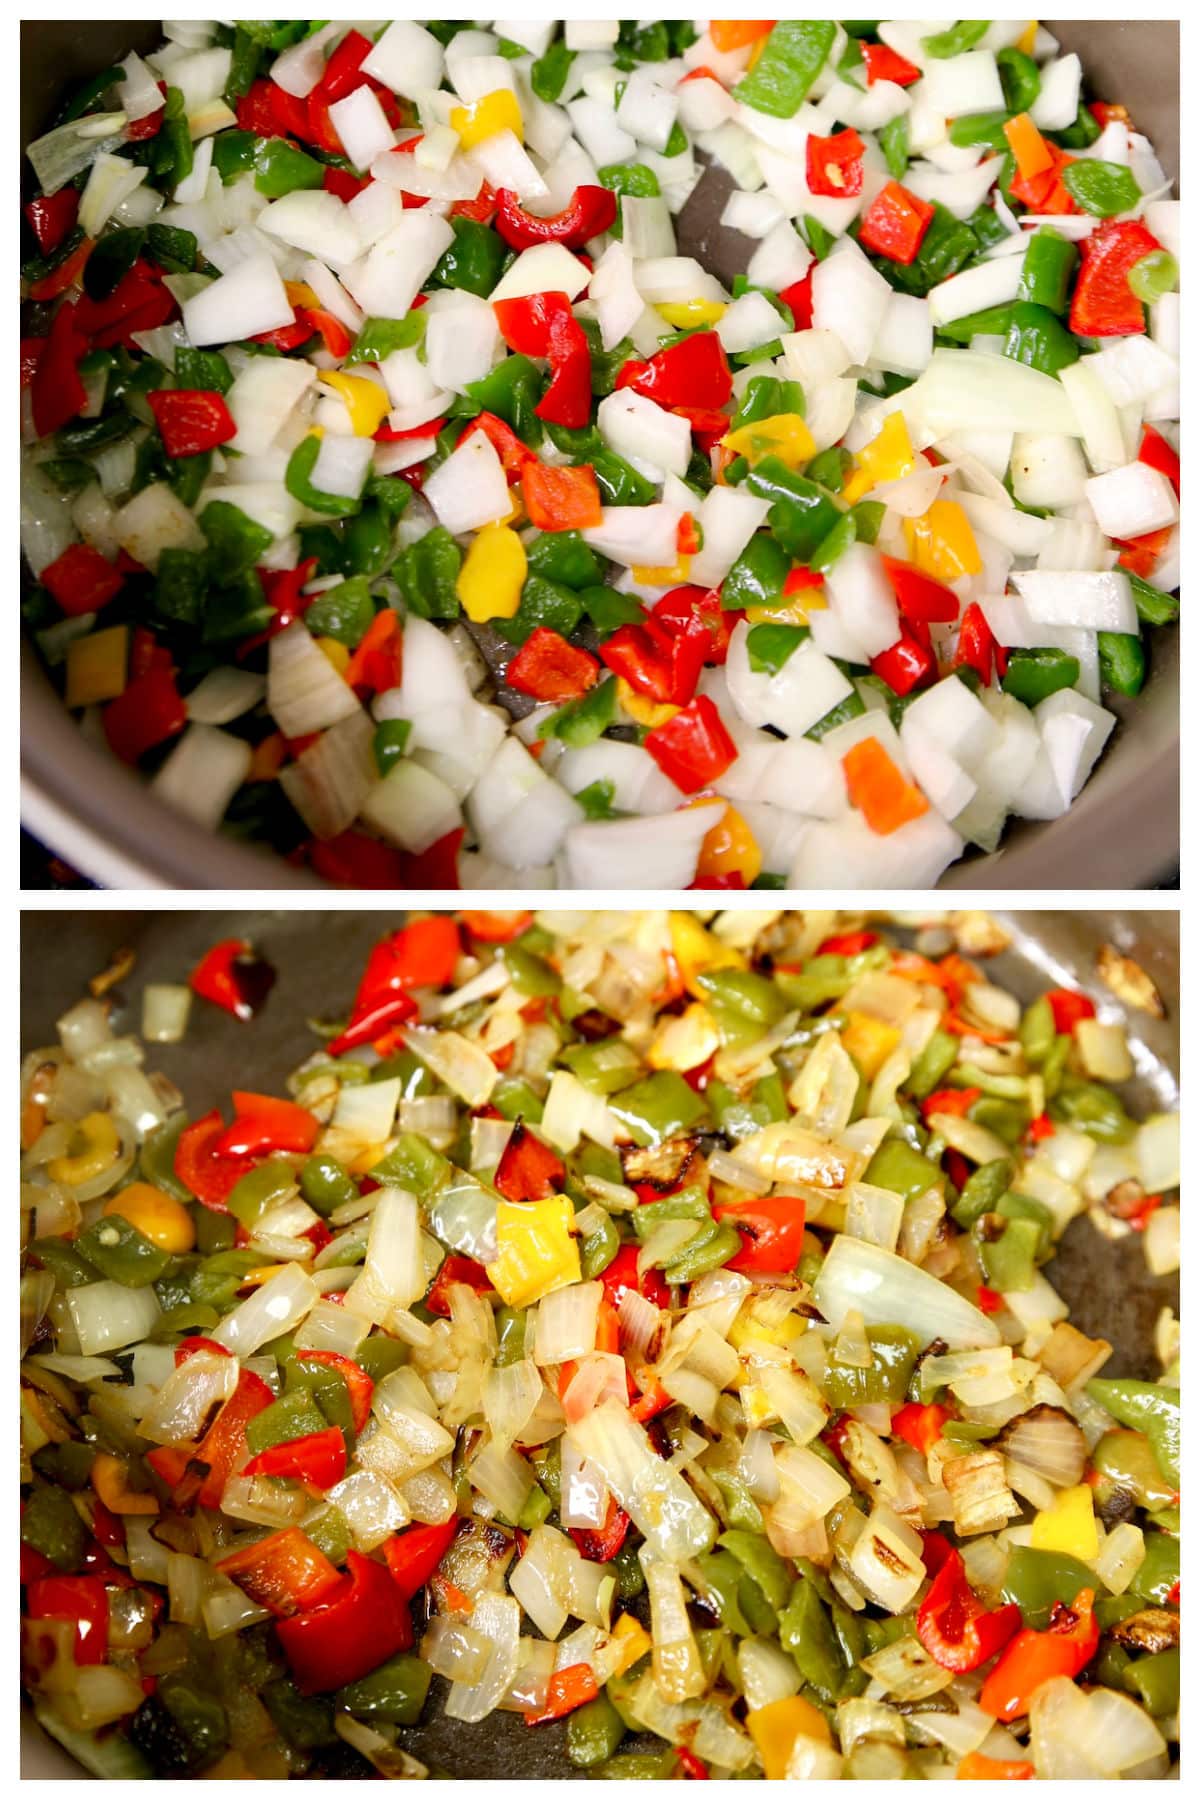 Cooking diced peppers and onions collage.